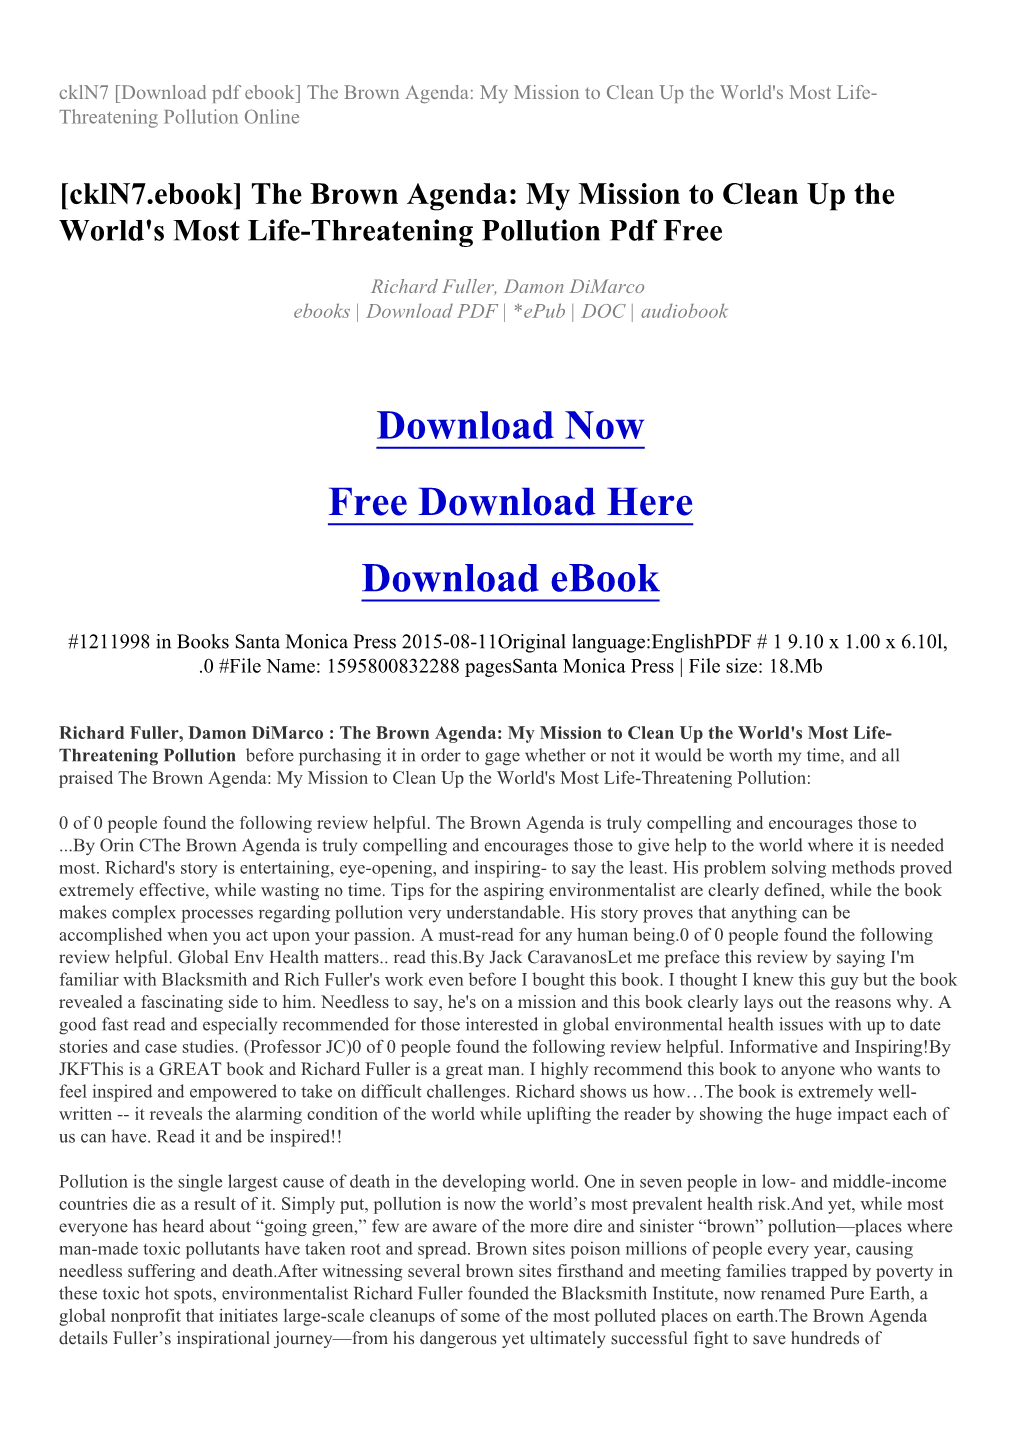 Ckln7 [Download Pdf Ebook] the Brown Agenda: My Mission to Clean up the World's Most Life- Threatening Pollution Online